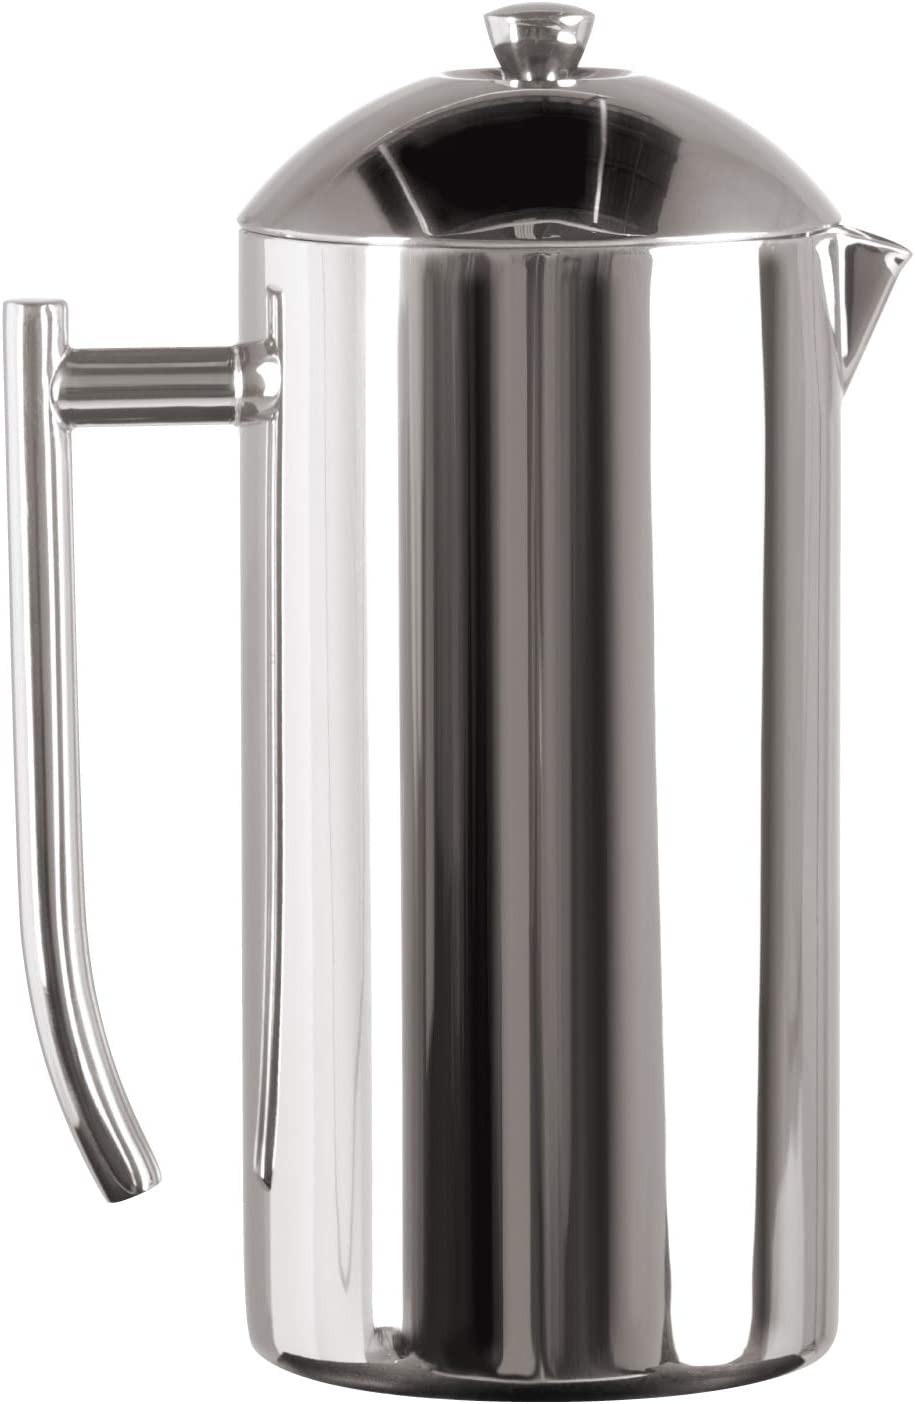 Frieling Double-Walled Stainless-Steel French Press Coffee Maker in Frustration Free Packaging, Polished, 17 Ounces Import To